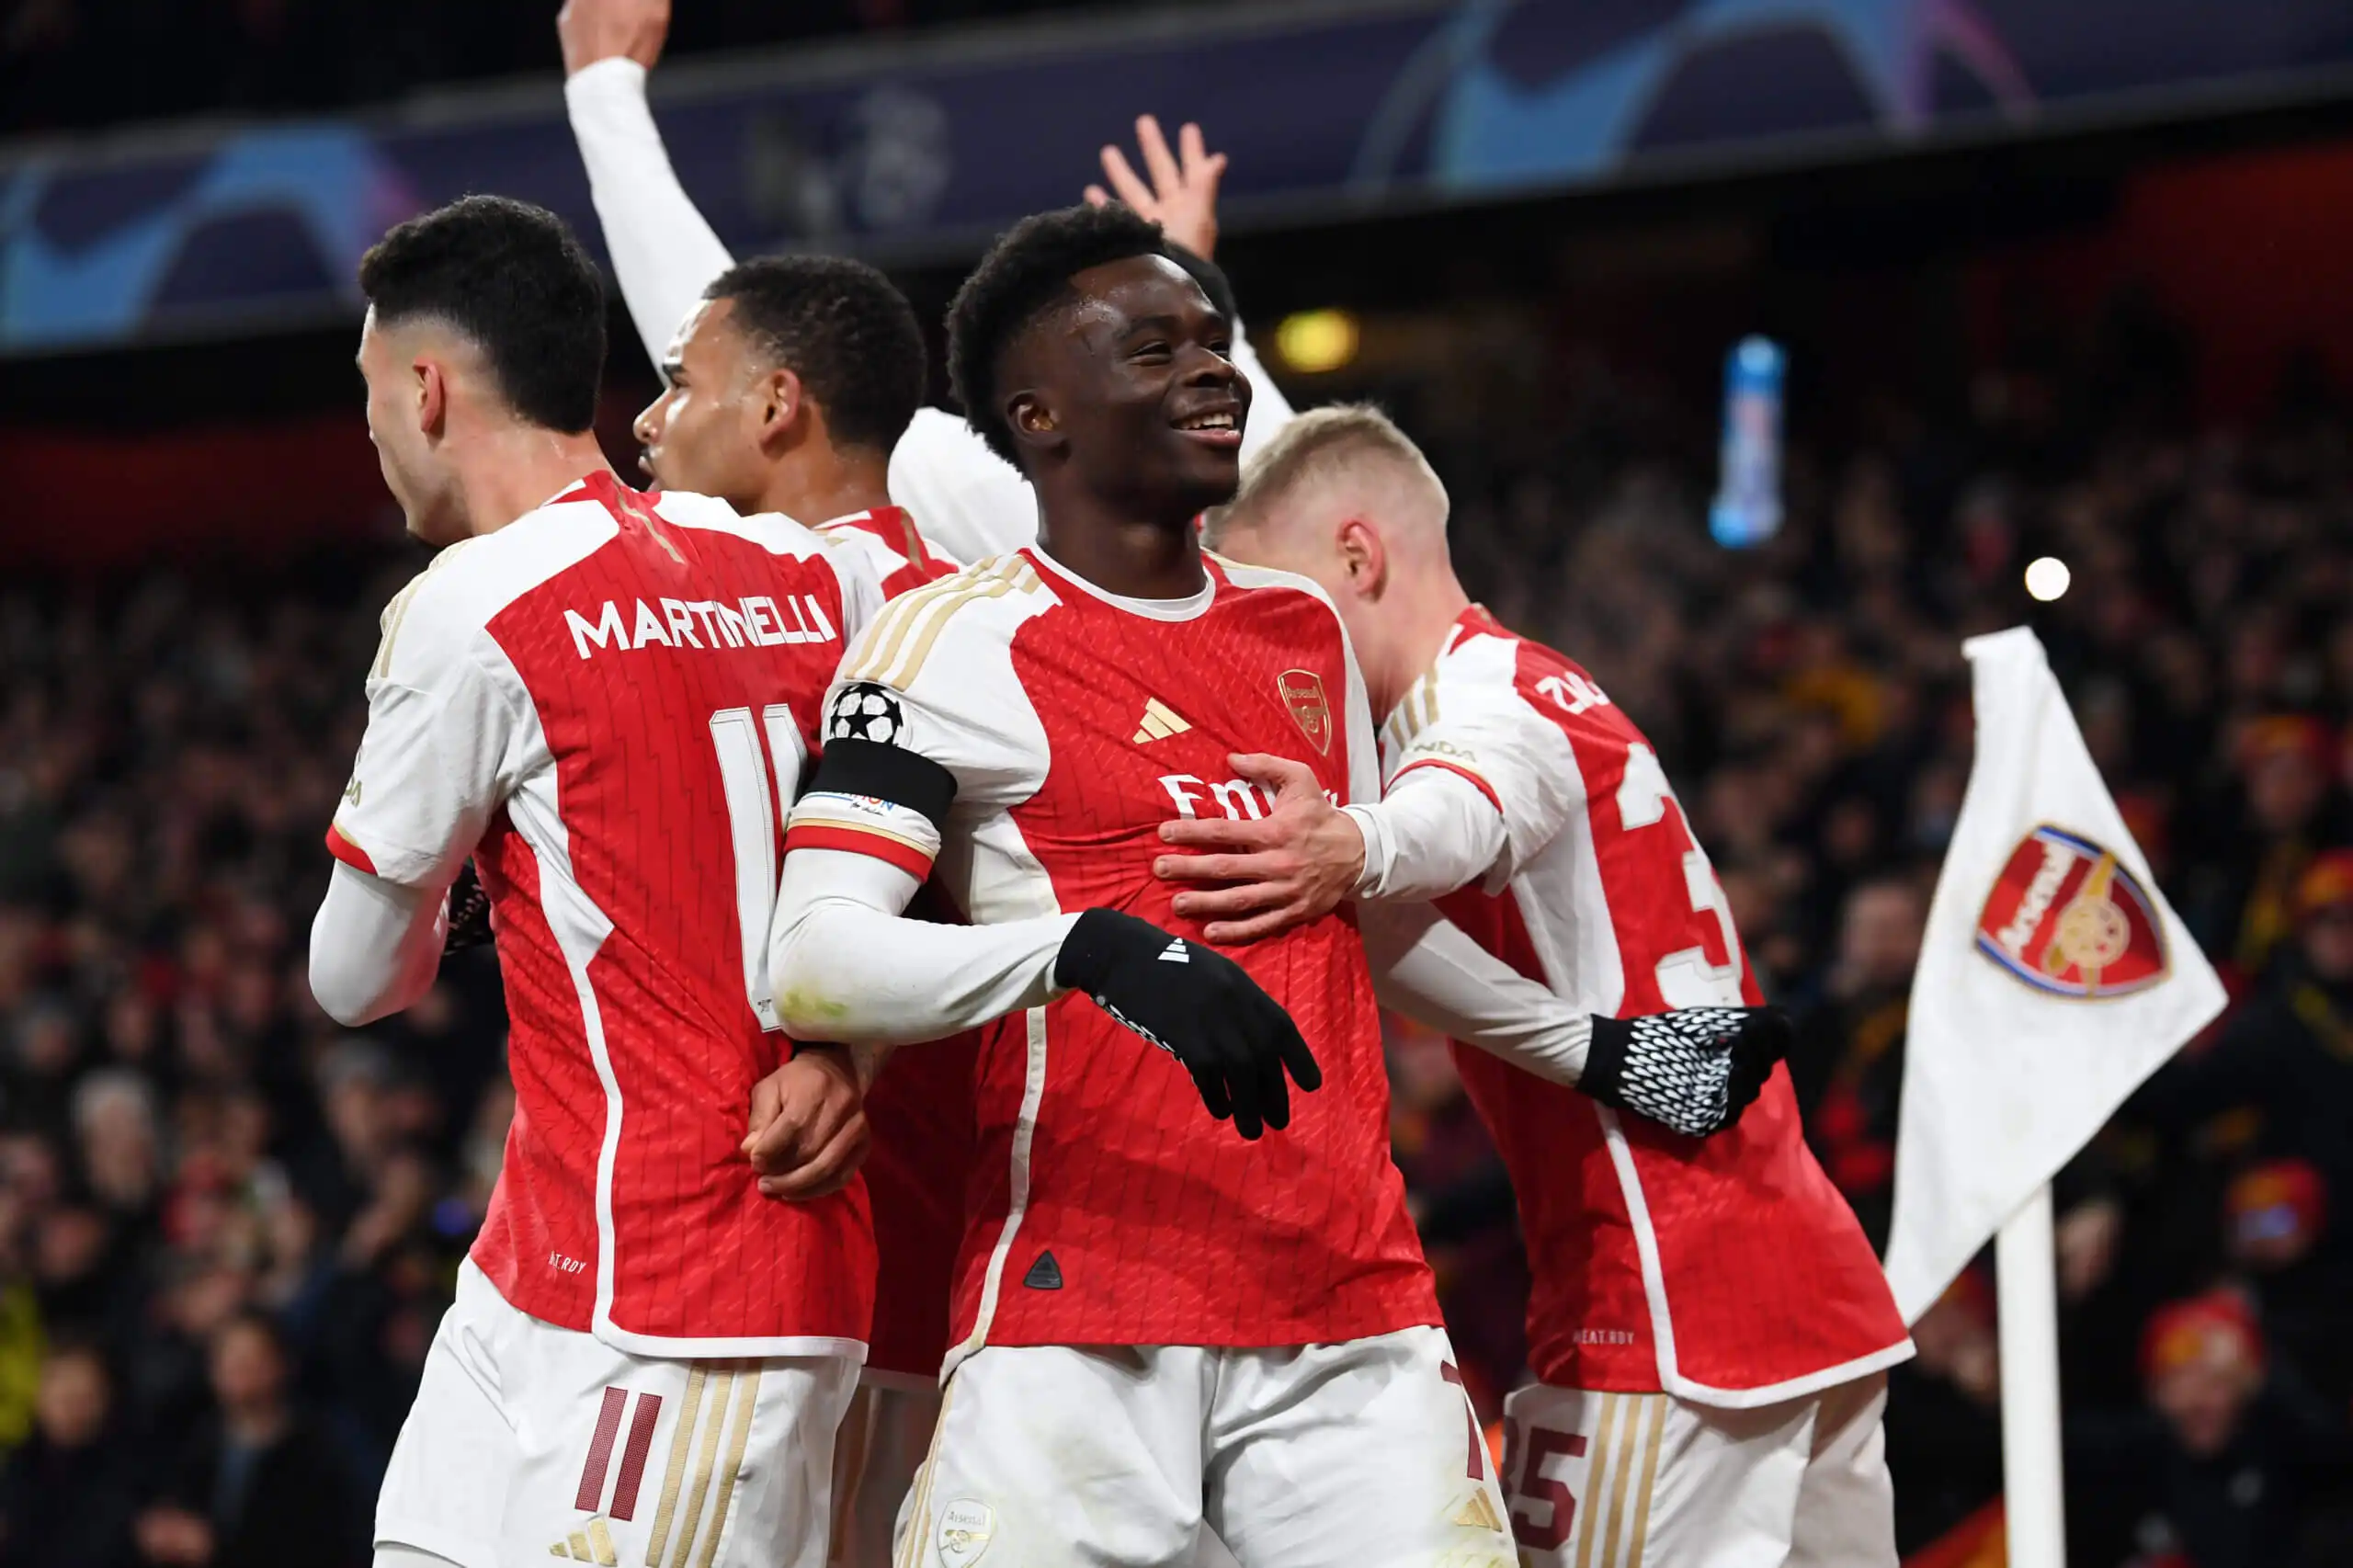 Briefing: Arsenal 6-0 Lens - Jesus Finish, Front Five Fear, Qualification Secured